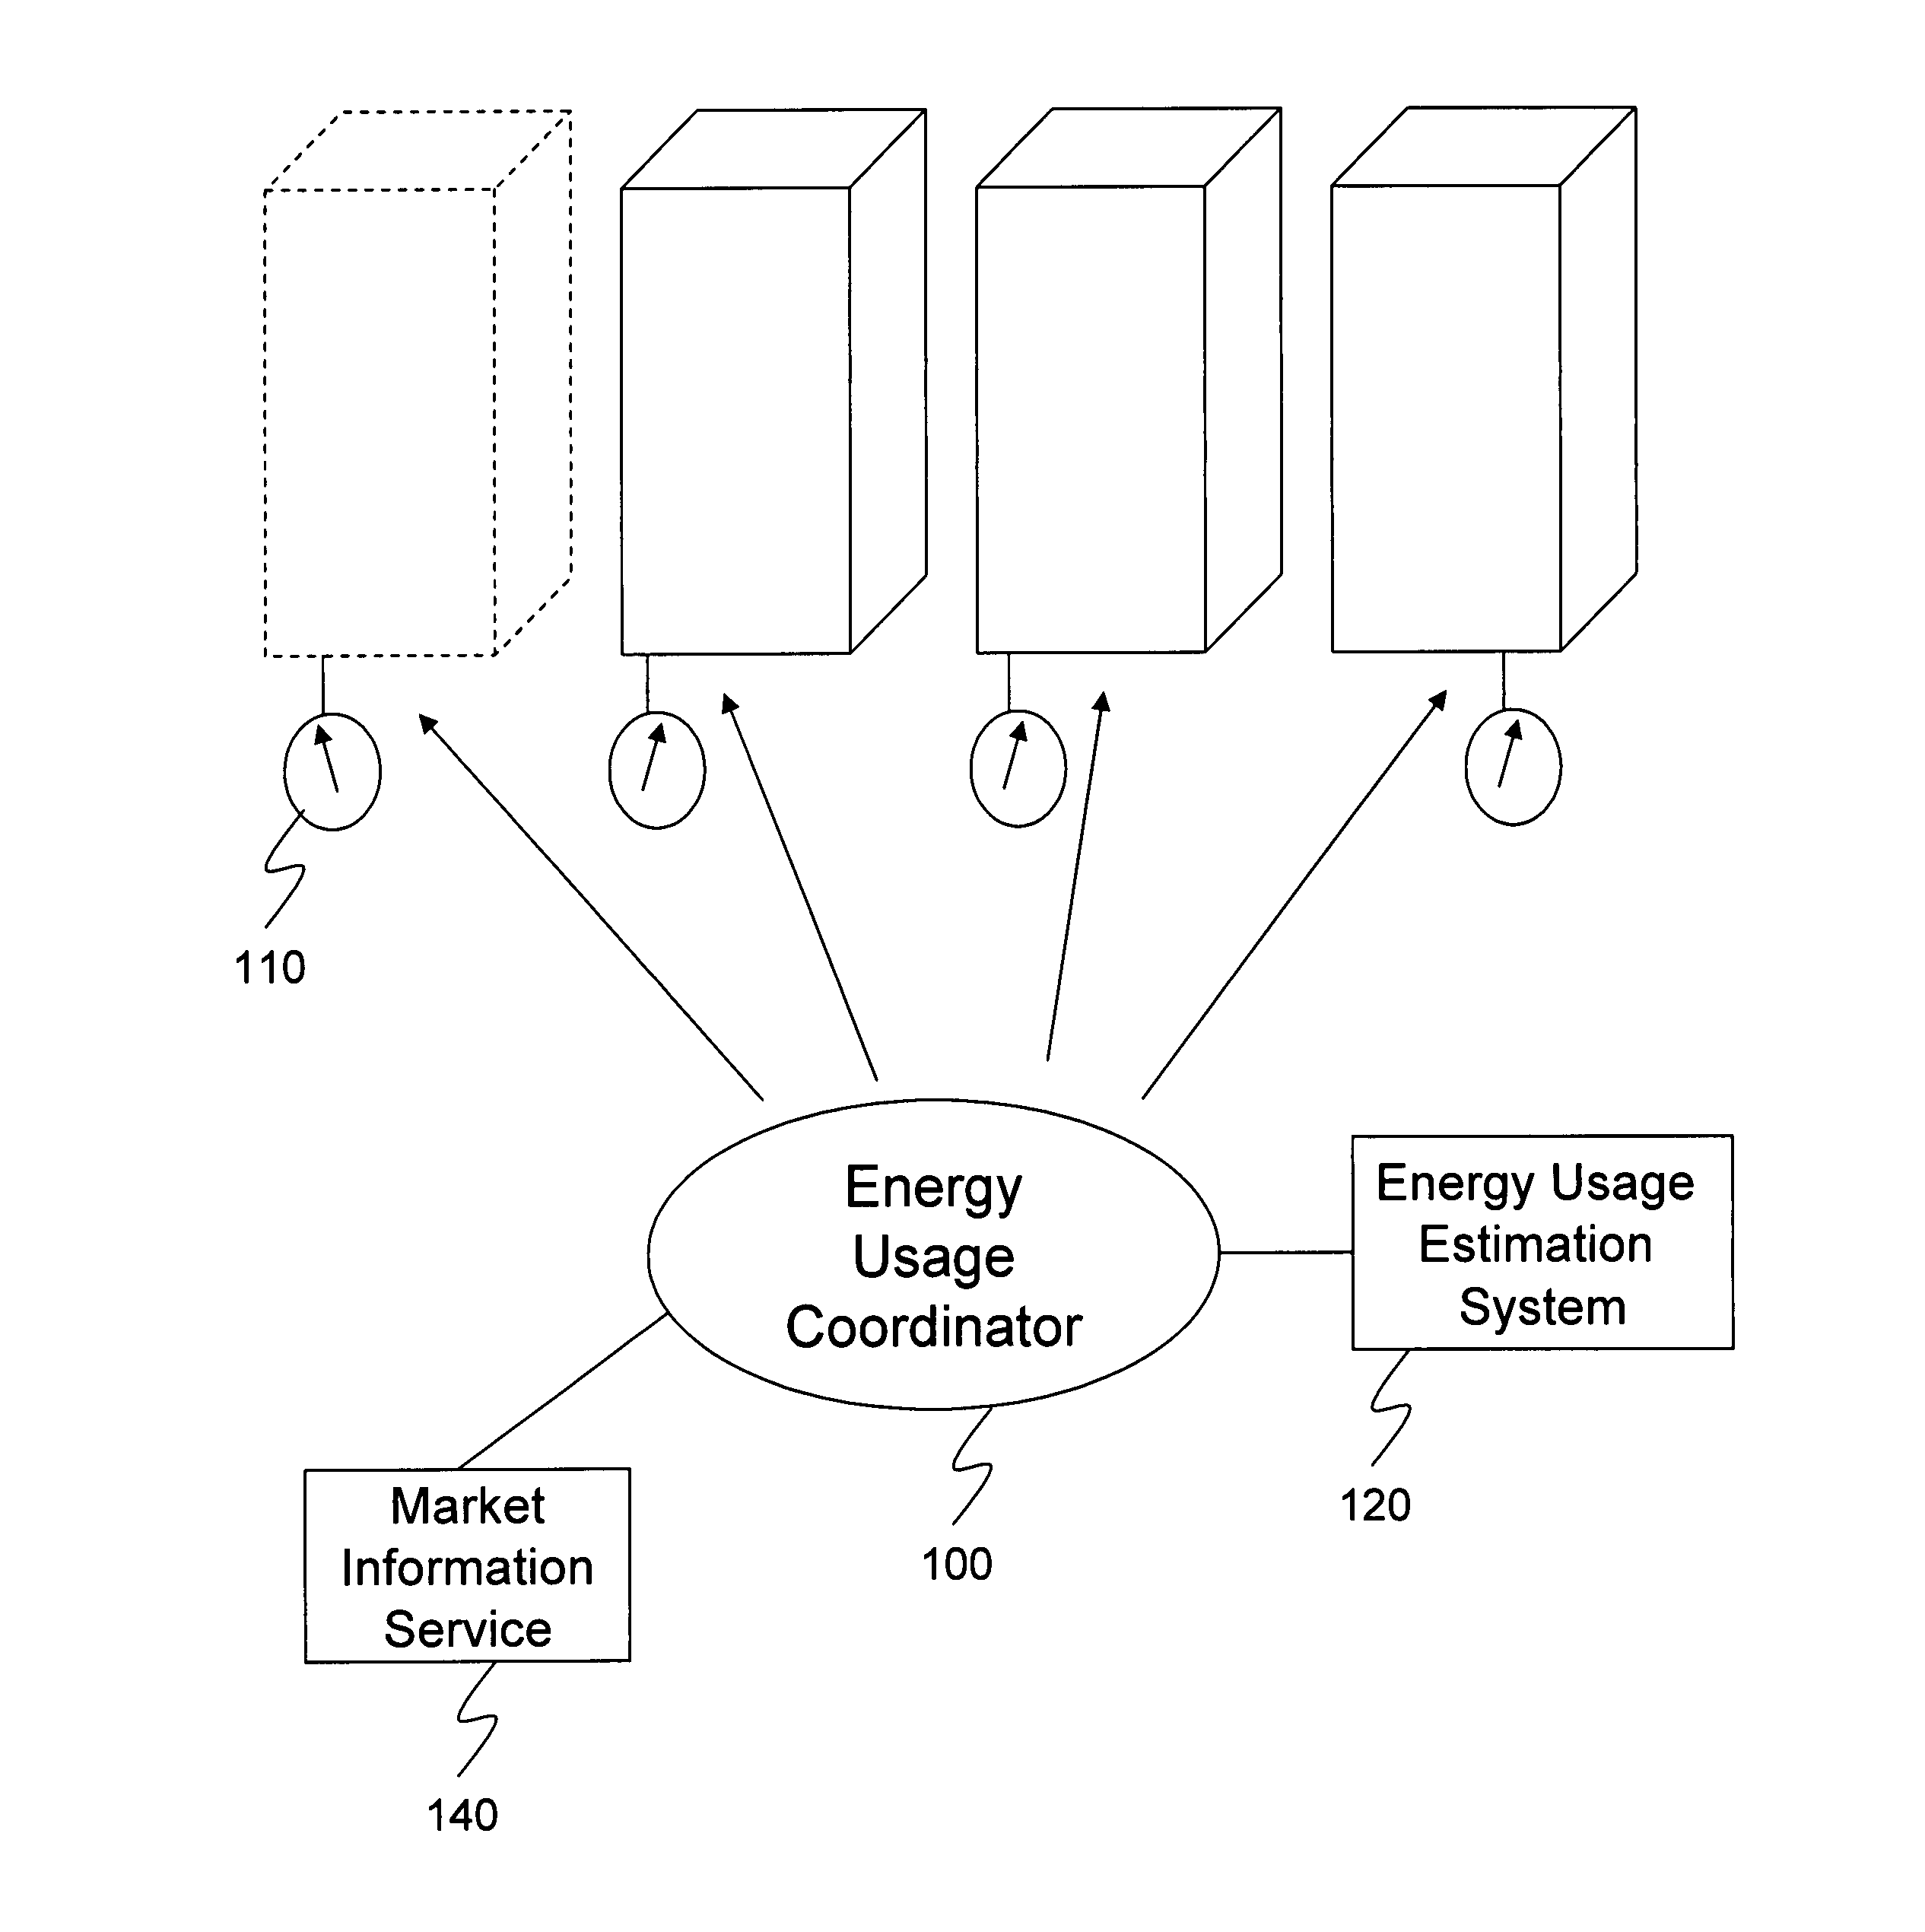 Multi-building control for demand response power usage control